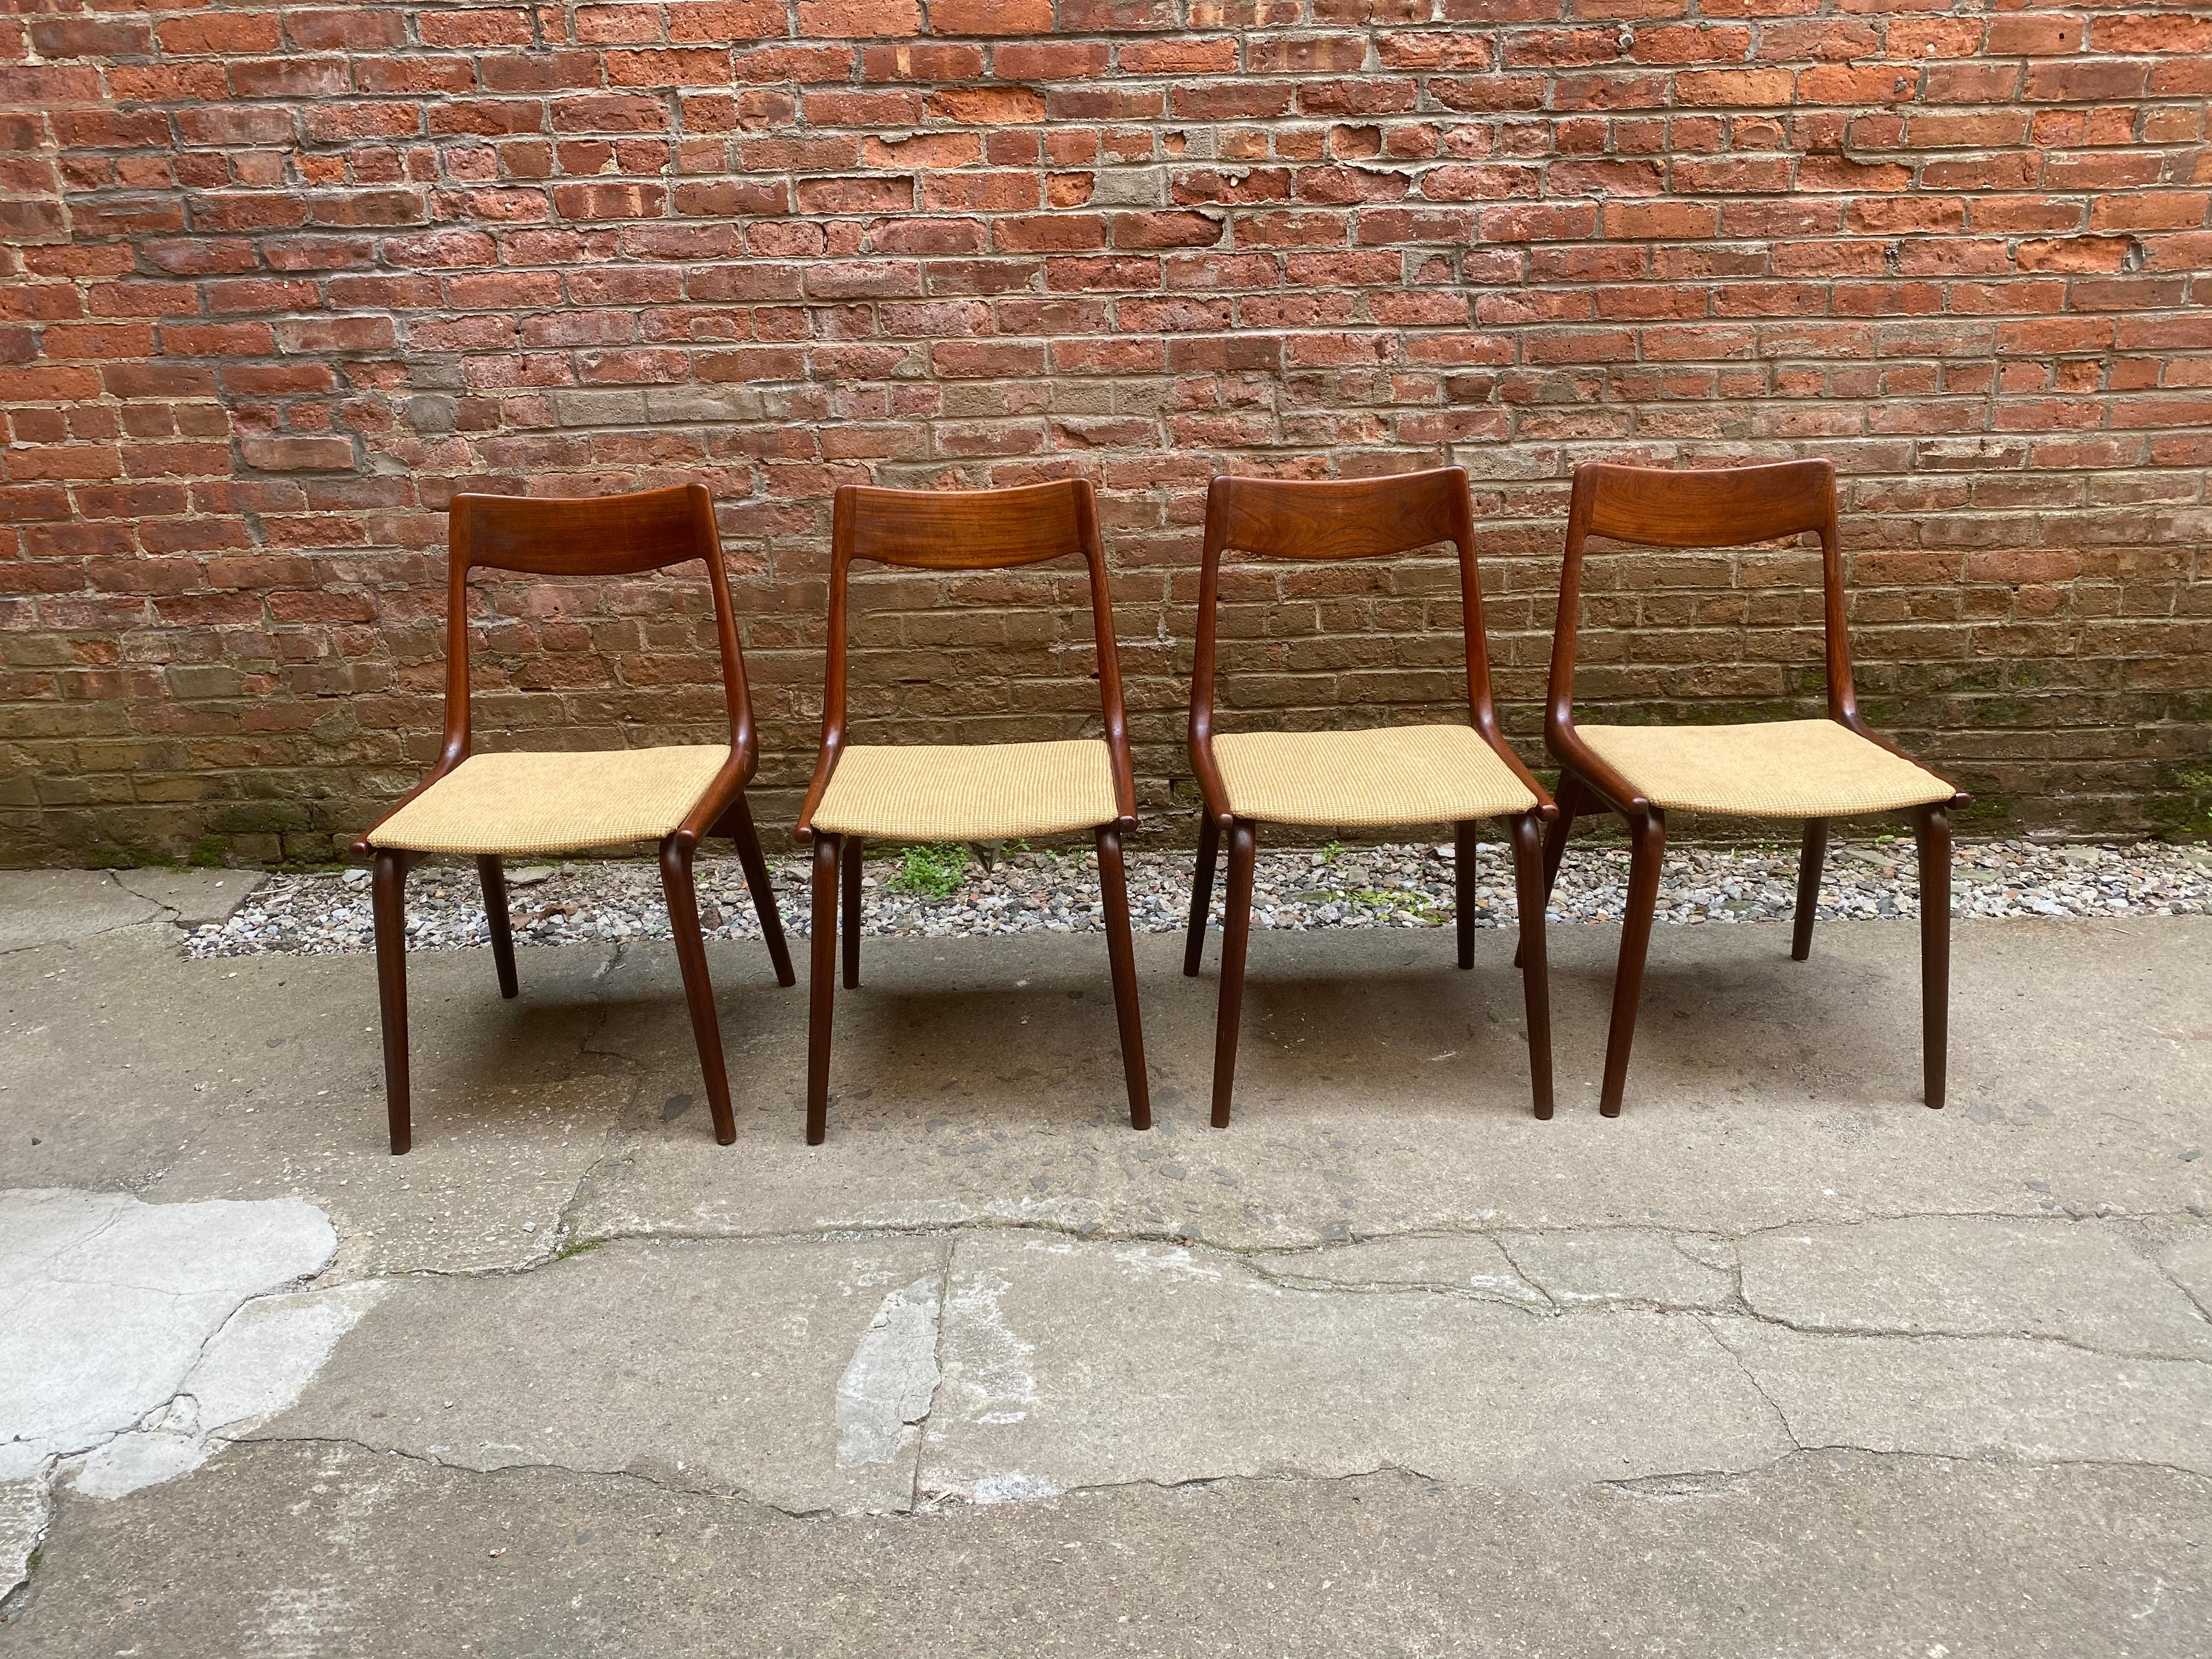 Set of four solid teak Danish modern Boomerang chairs designed by Alfred Christensen. Sculptural and ergonomically built for maximum comfort. A great chair with great lines and subtle details; box joint dovetailing, tapered legs and stretchers and